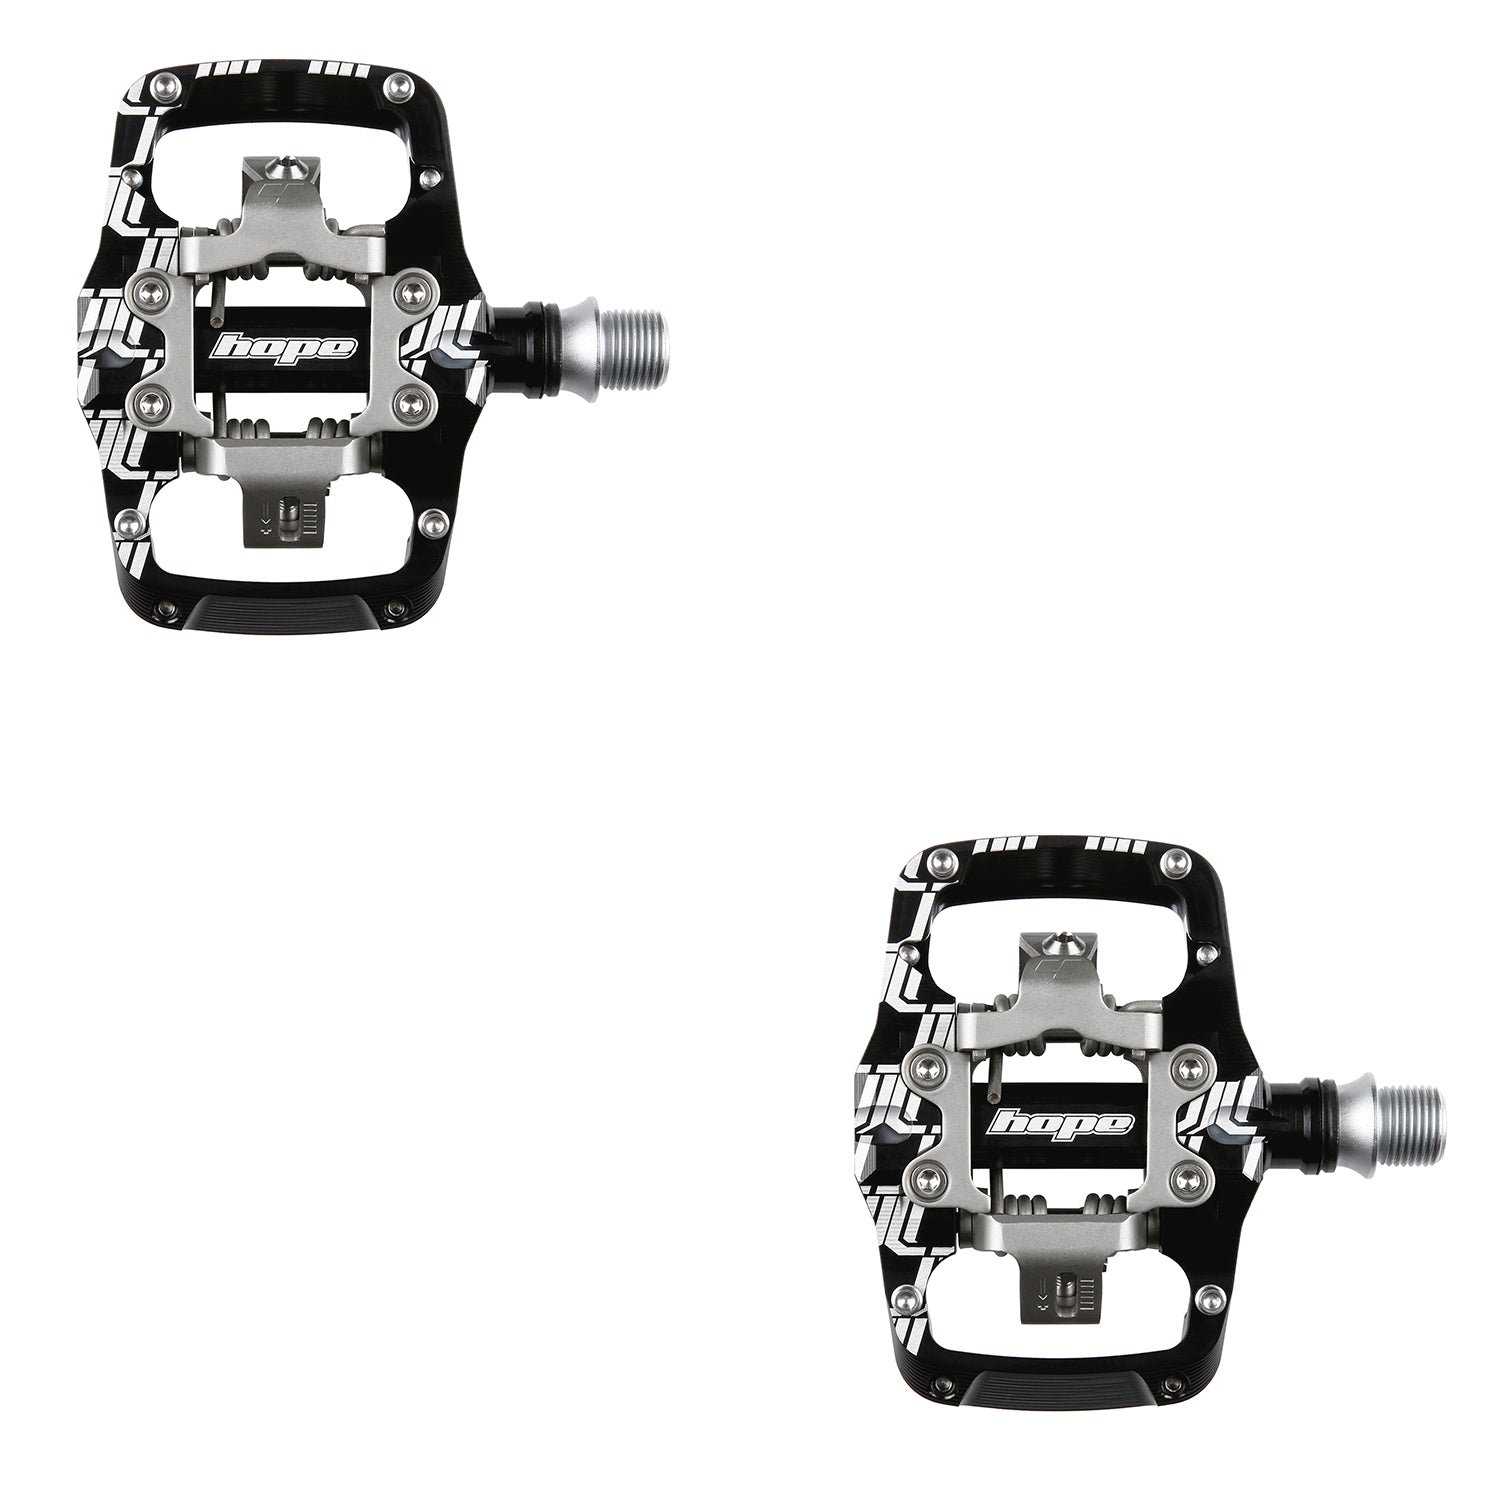 Hope union clipless trail pedals black